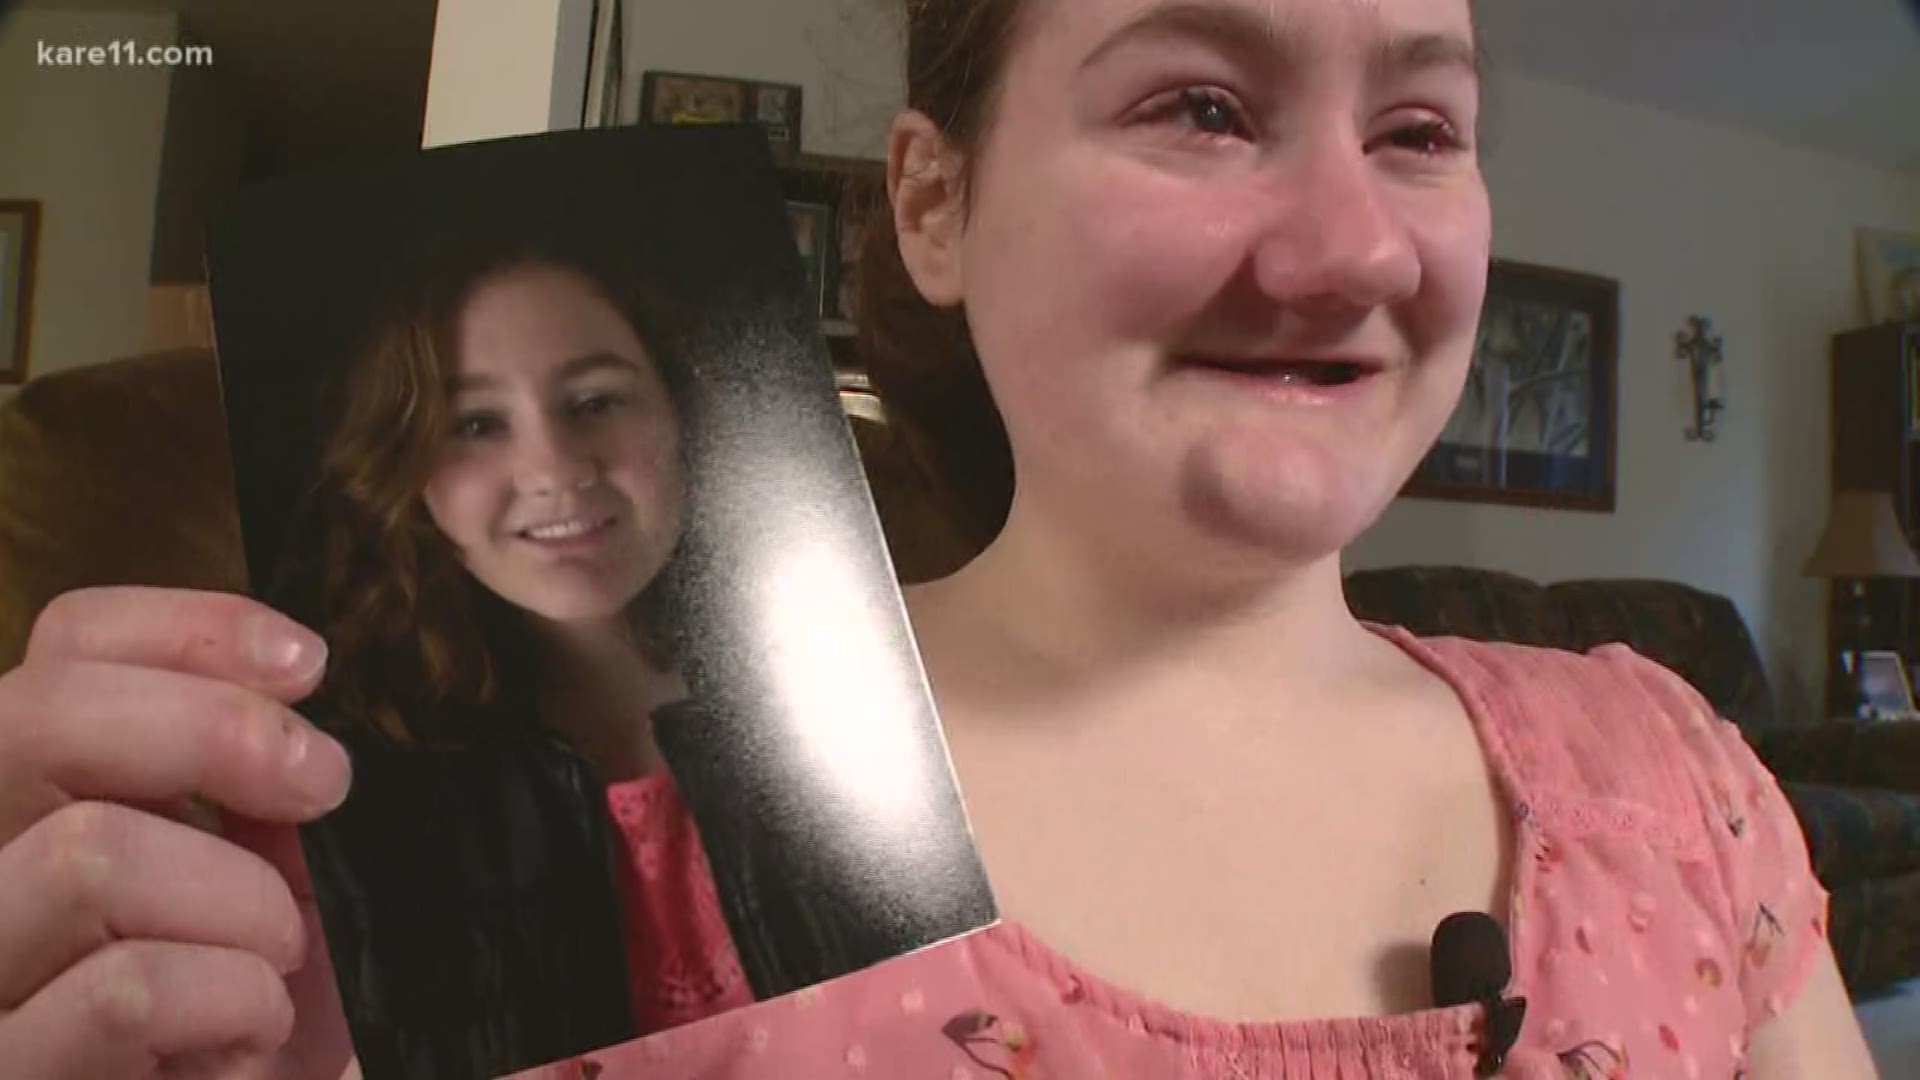 Gabby Gingras' story has been viewed around the world. What her doctors deem as necessary surgery is being denied payment by her health insurance company. https://kare11.tv/2kjKZJZ